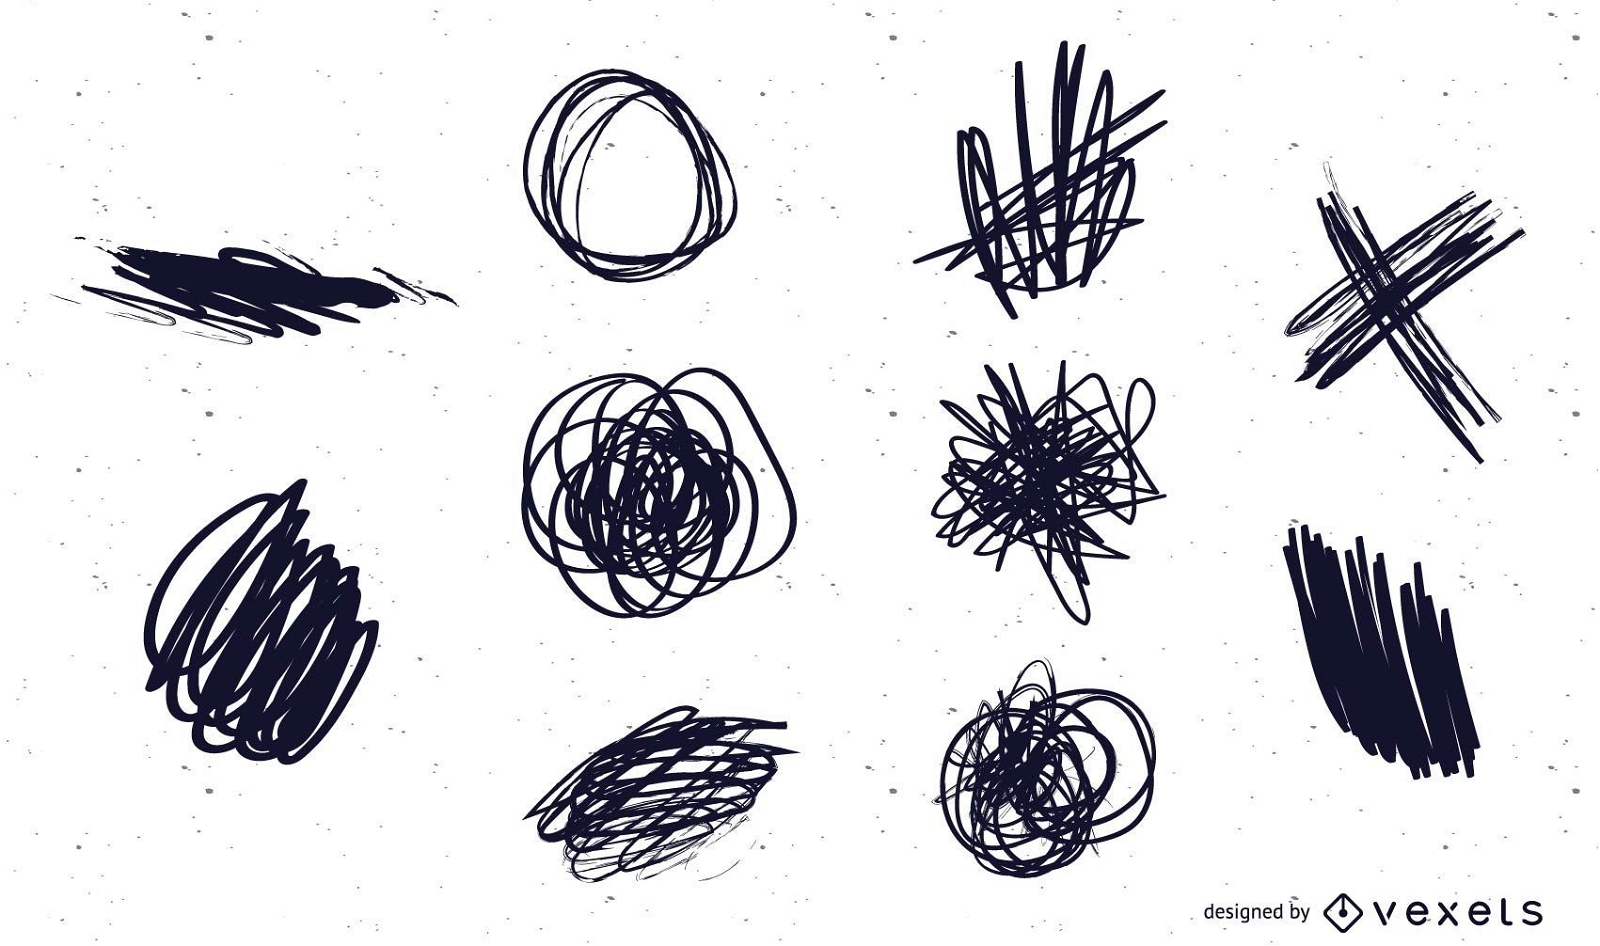 10 Vector Ink Scribbles and Scratches